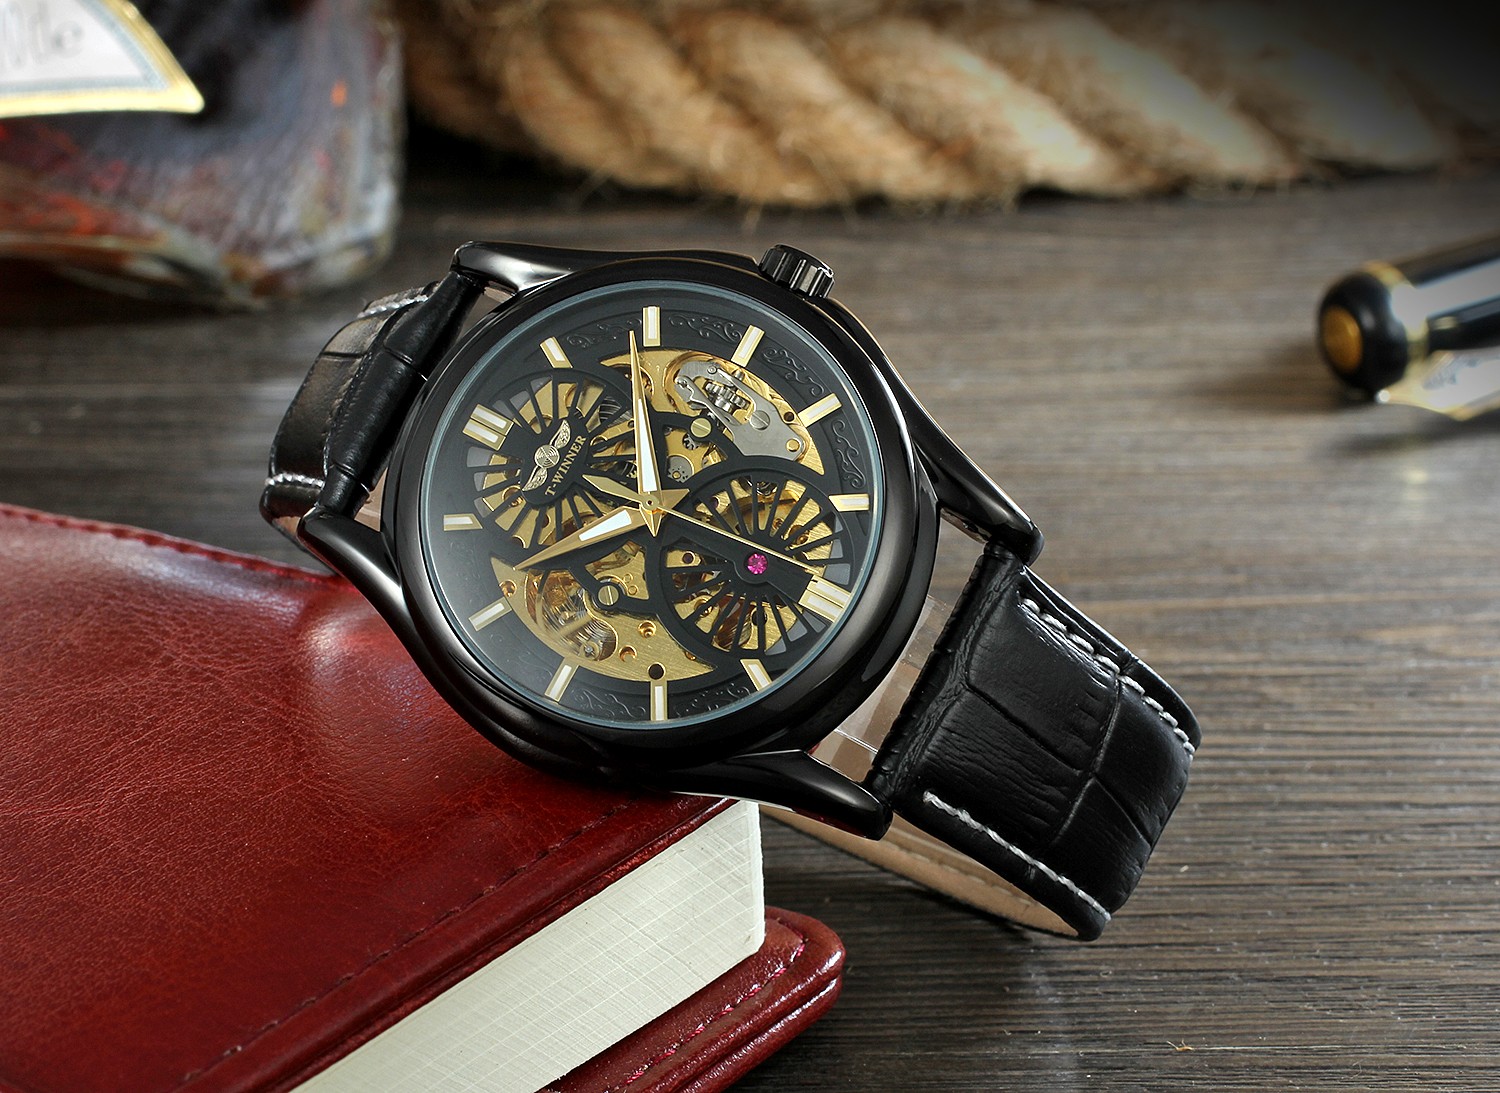 A3-Genuine-Leather-Strap-Automatic-Mechanical-Watch-Fashionable-Transparent-Case-Men-Watch-1244943